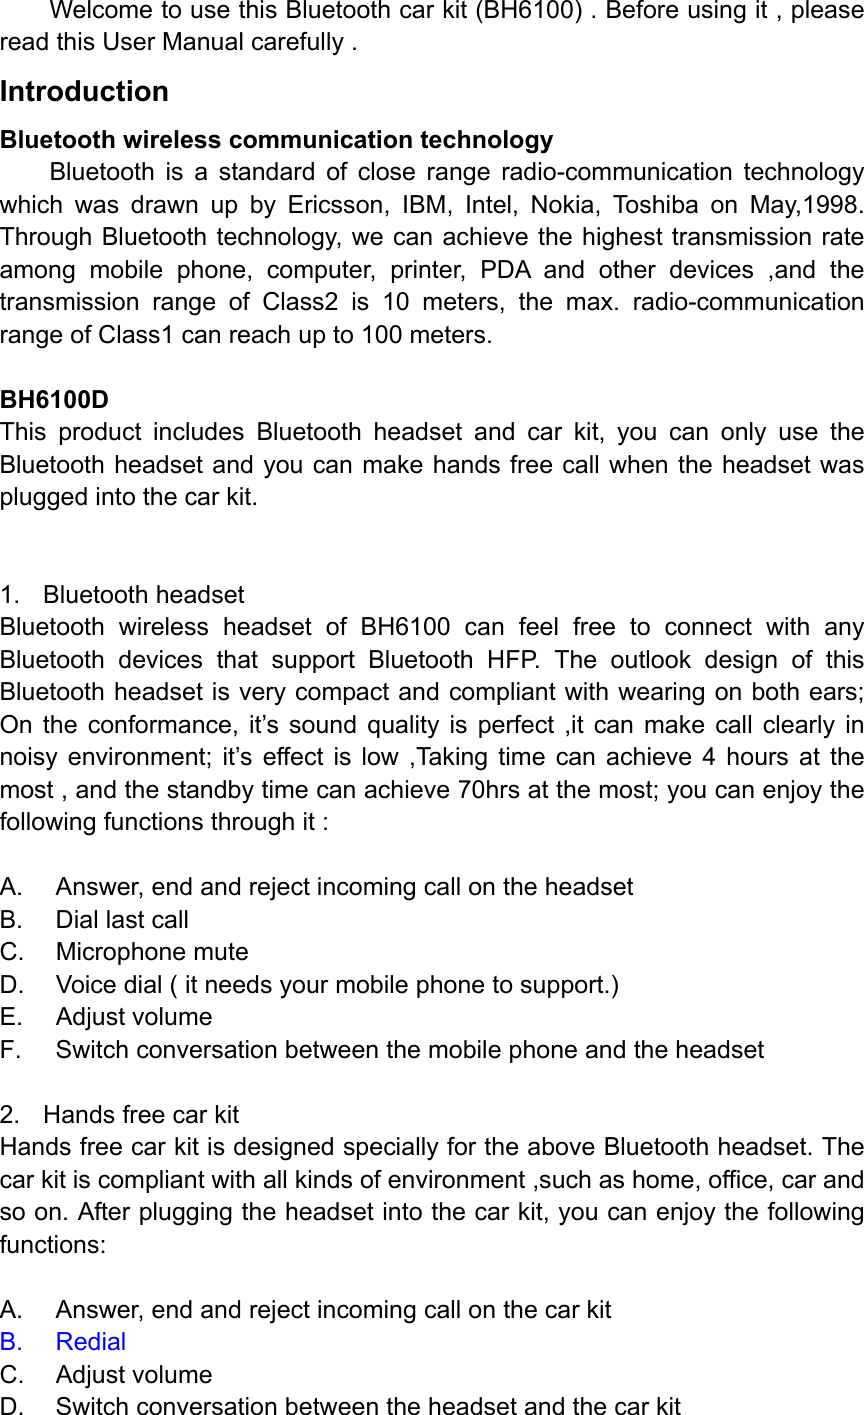 Welcome to use this Bluetooth car kit (BH6100) . Before using it , please read this User Manual carefully . Introduction Bluetooth wireless communication technology Bluetooth is a standard of close range radio-communication technology which was drawn up by Ericsson, IBM, Intel, Nokia, Toshiba on May,1998. Through Bluetooth technology, we can achieve the highest transmission rate among mobile phone, computer, printer, PDA and other devices ,and the transmission range of Class2 is 10 meters, the max. radio-communication range of Class1 can reach up to 100 meters.  BH6100D This product includes Bluetooth headset and car kit, you can only use the Bluetooth headset and you can make hands free call when the headset was plugged into the car kit.   1. Bluetooth headset Bluetooth wireless headset of BH6100 can feel free to connect with any Bluetooth devices that support Bluetooth HFP. The outlook design of this Bluetooth headset is very compact and compliant with wearing on both ears; On the conformance, it’s sound quality is perfect ,it can make call clearly in noisy environment; it’s effect is low ,Taking time can achieve 4 hours at the most , and the standby time can achieve 70hrs at the most; you can enjoy the following functions through it :  A.  Answer, end and reject incoming call on the headset   B.  Dial last call C. Microphone mute D.  Voice dial ( it needs your mobile phone to support.) E. Adjust volume F.  Switch conversation between the mobile phone and the headset  2.  Hands free car kit Hands free car kit is designed specially for the above Bluetooth headset. The car kit is compliant with all kinds of environment ,such as home, office, car and so on. After plugging the headset into the car kit, you can enjoy the following functions:  A.  Answer, end and reject incoming call on the car kit B. Redial C. Adjust volume D.  Switch conversation between the headset and the car kit 